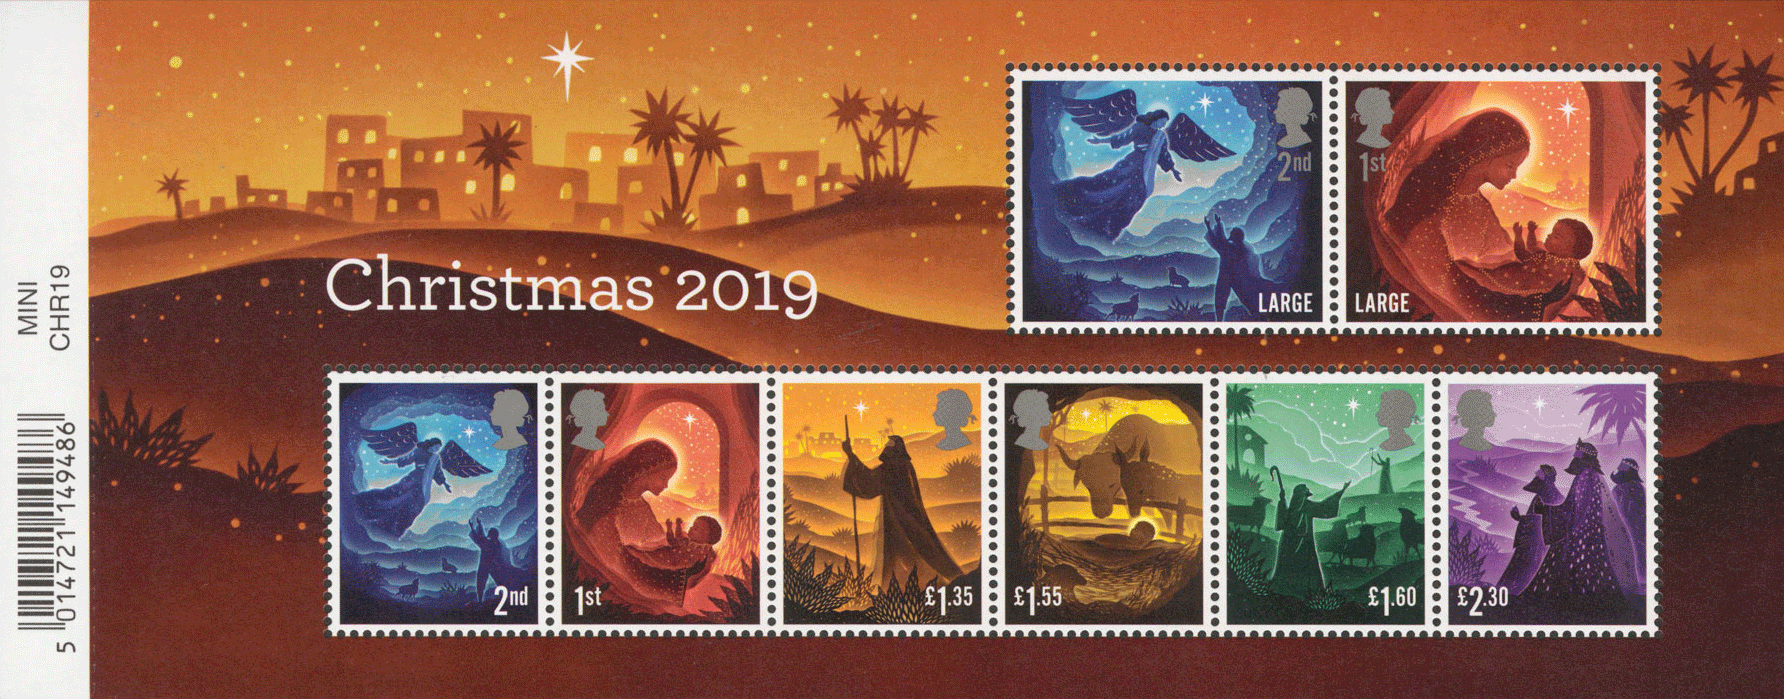 Small sheet of stamps depicting images of the nativity.